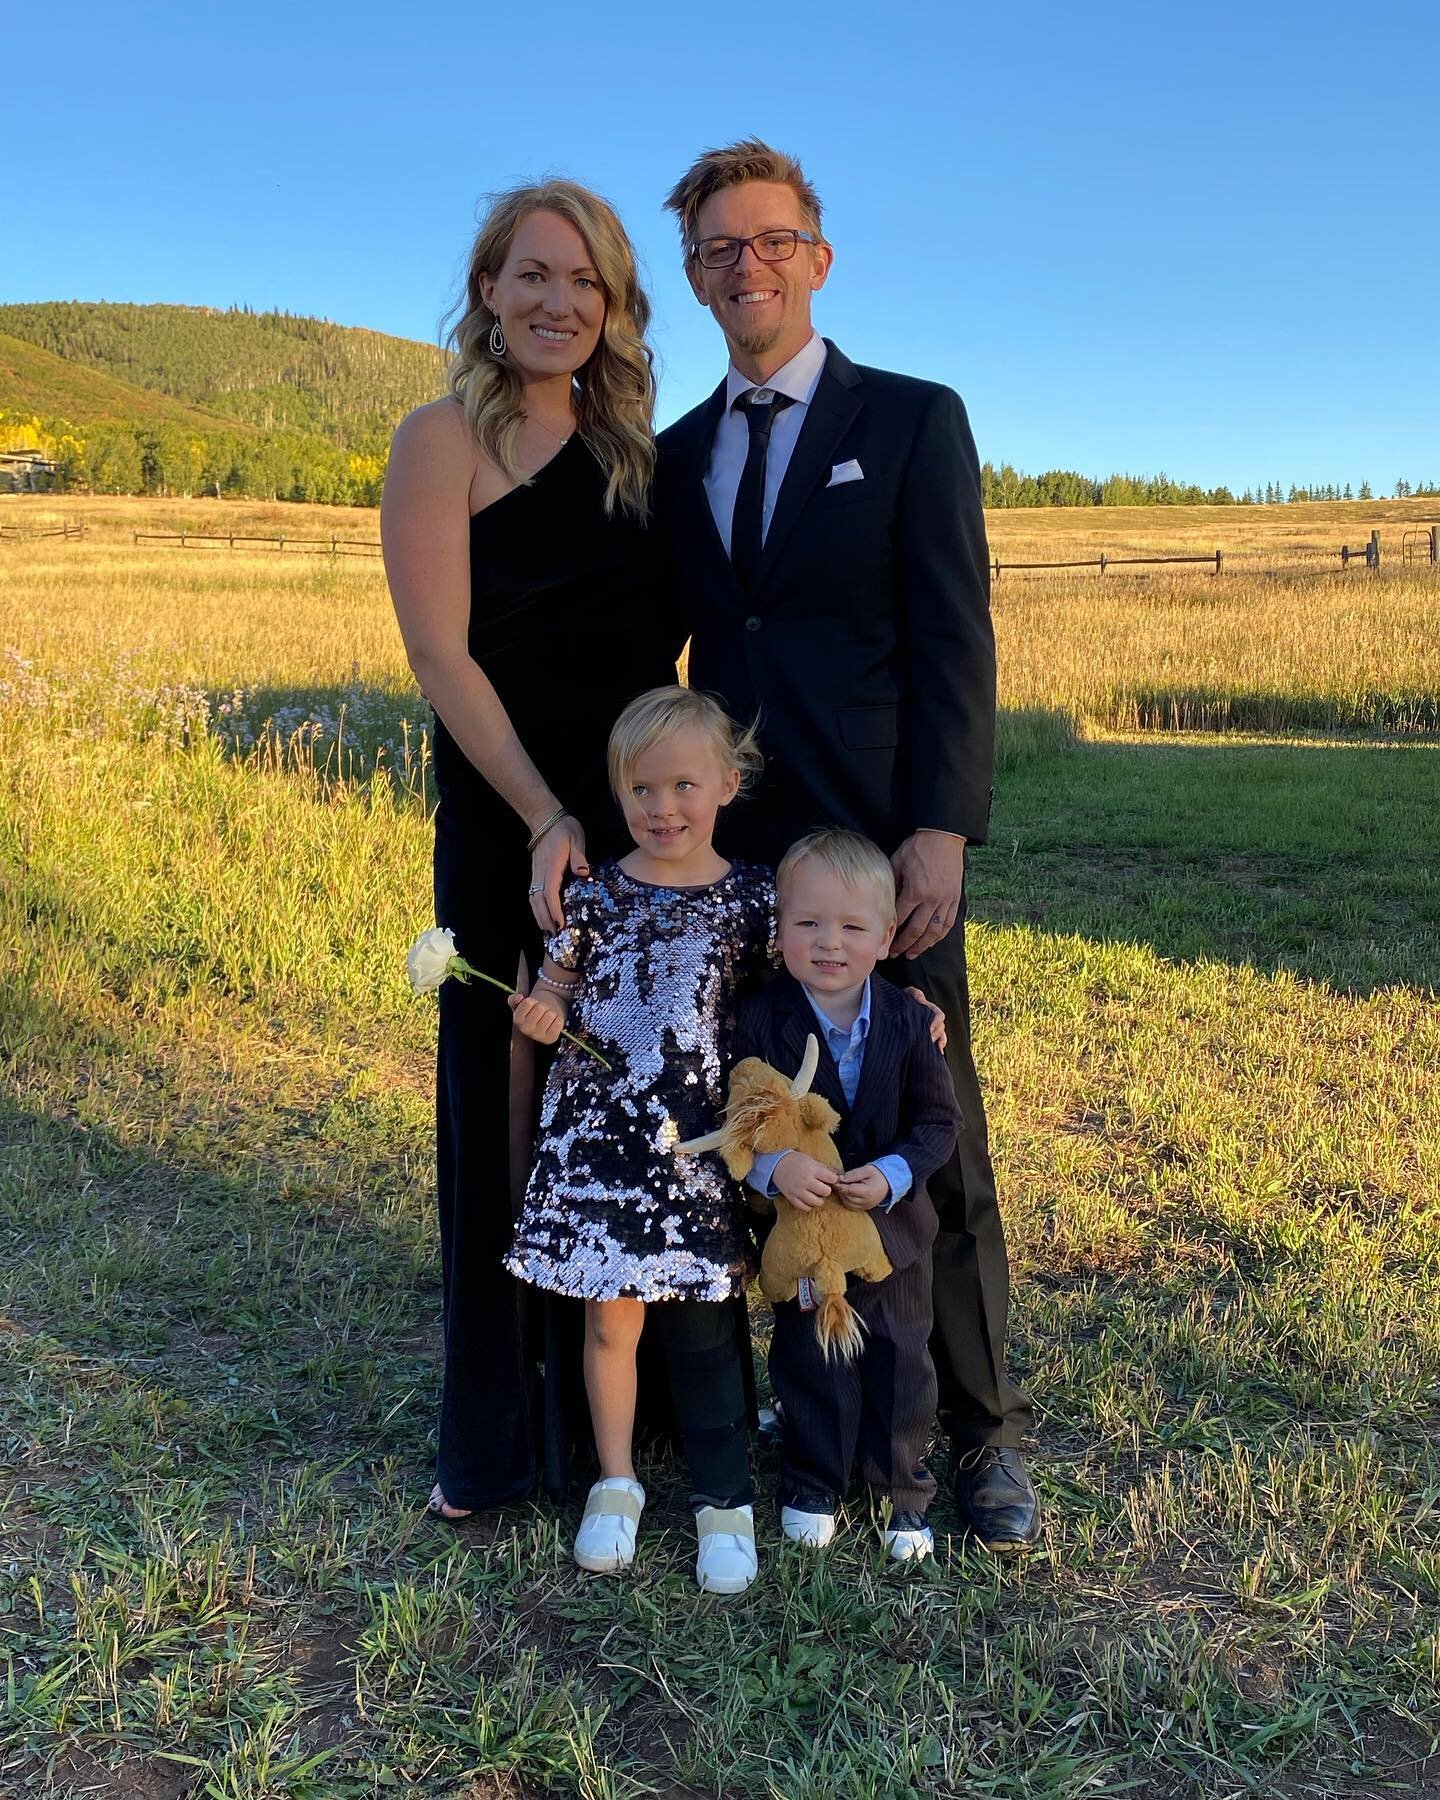 Last weekend we went to Aspen to join my whole extended family (in our state!) to celebrate the wedding of our cousin Cara and new cousin Peter. We spent time with family, saw the changing Aspens in the beautiful mountains, got away, ate, danced, and